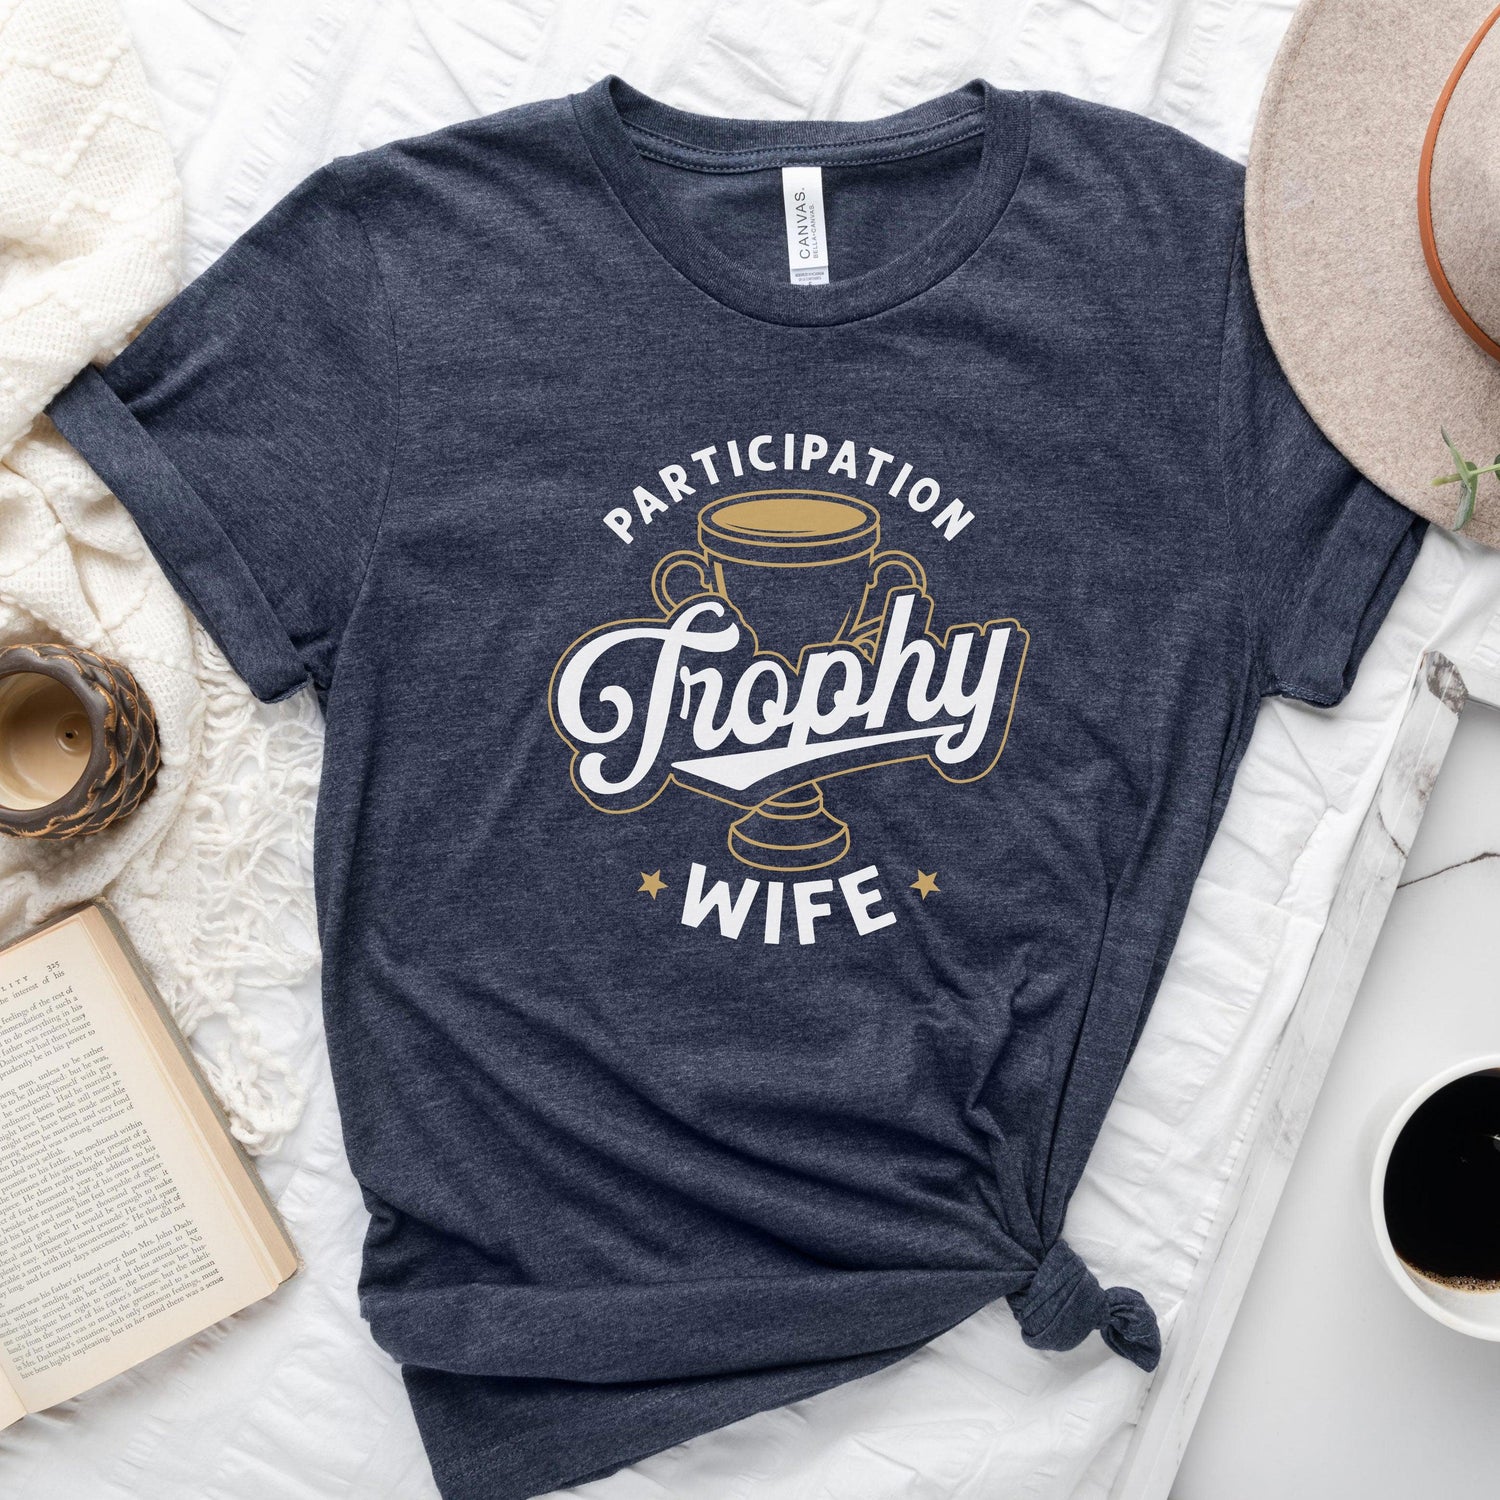 Participation Trophy Wife - Funny Wifey Shirt - Gift for Her - Unisex t-shirt by Oaklynn Lane